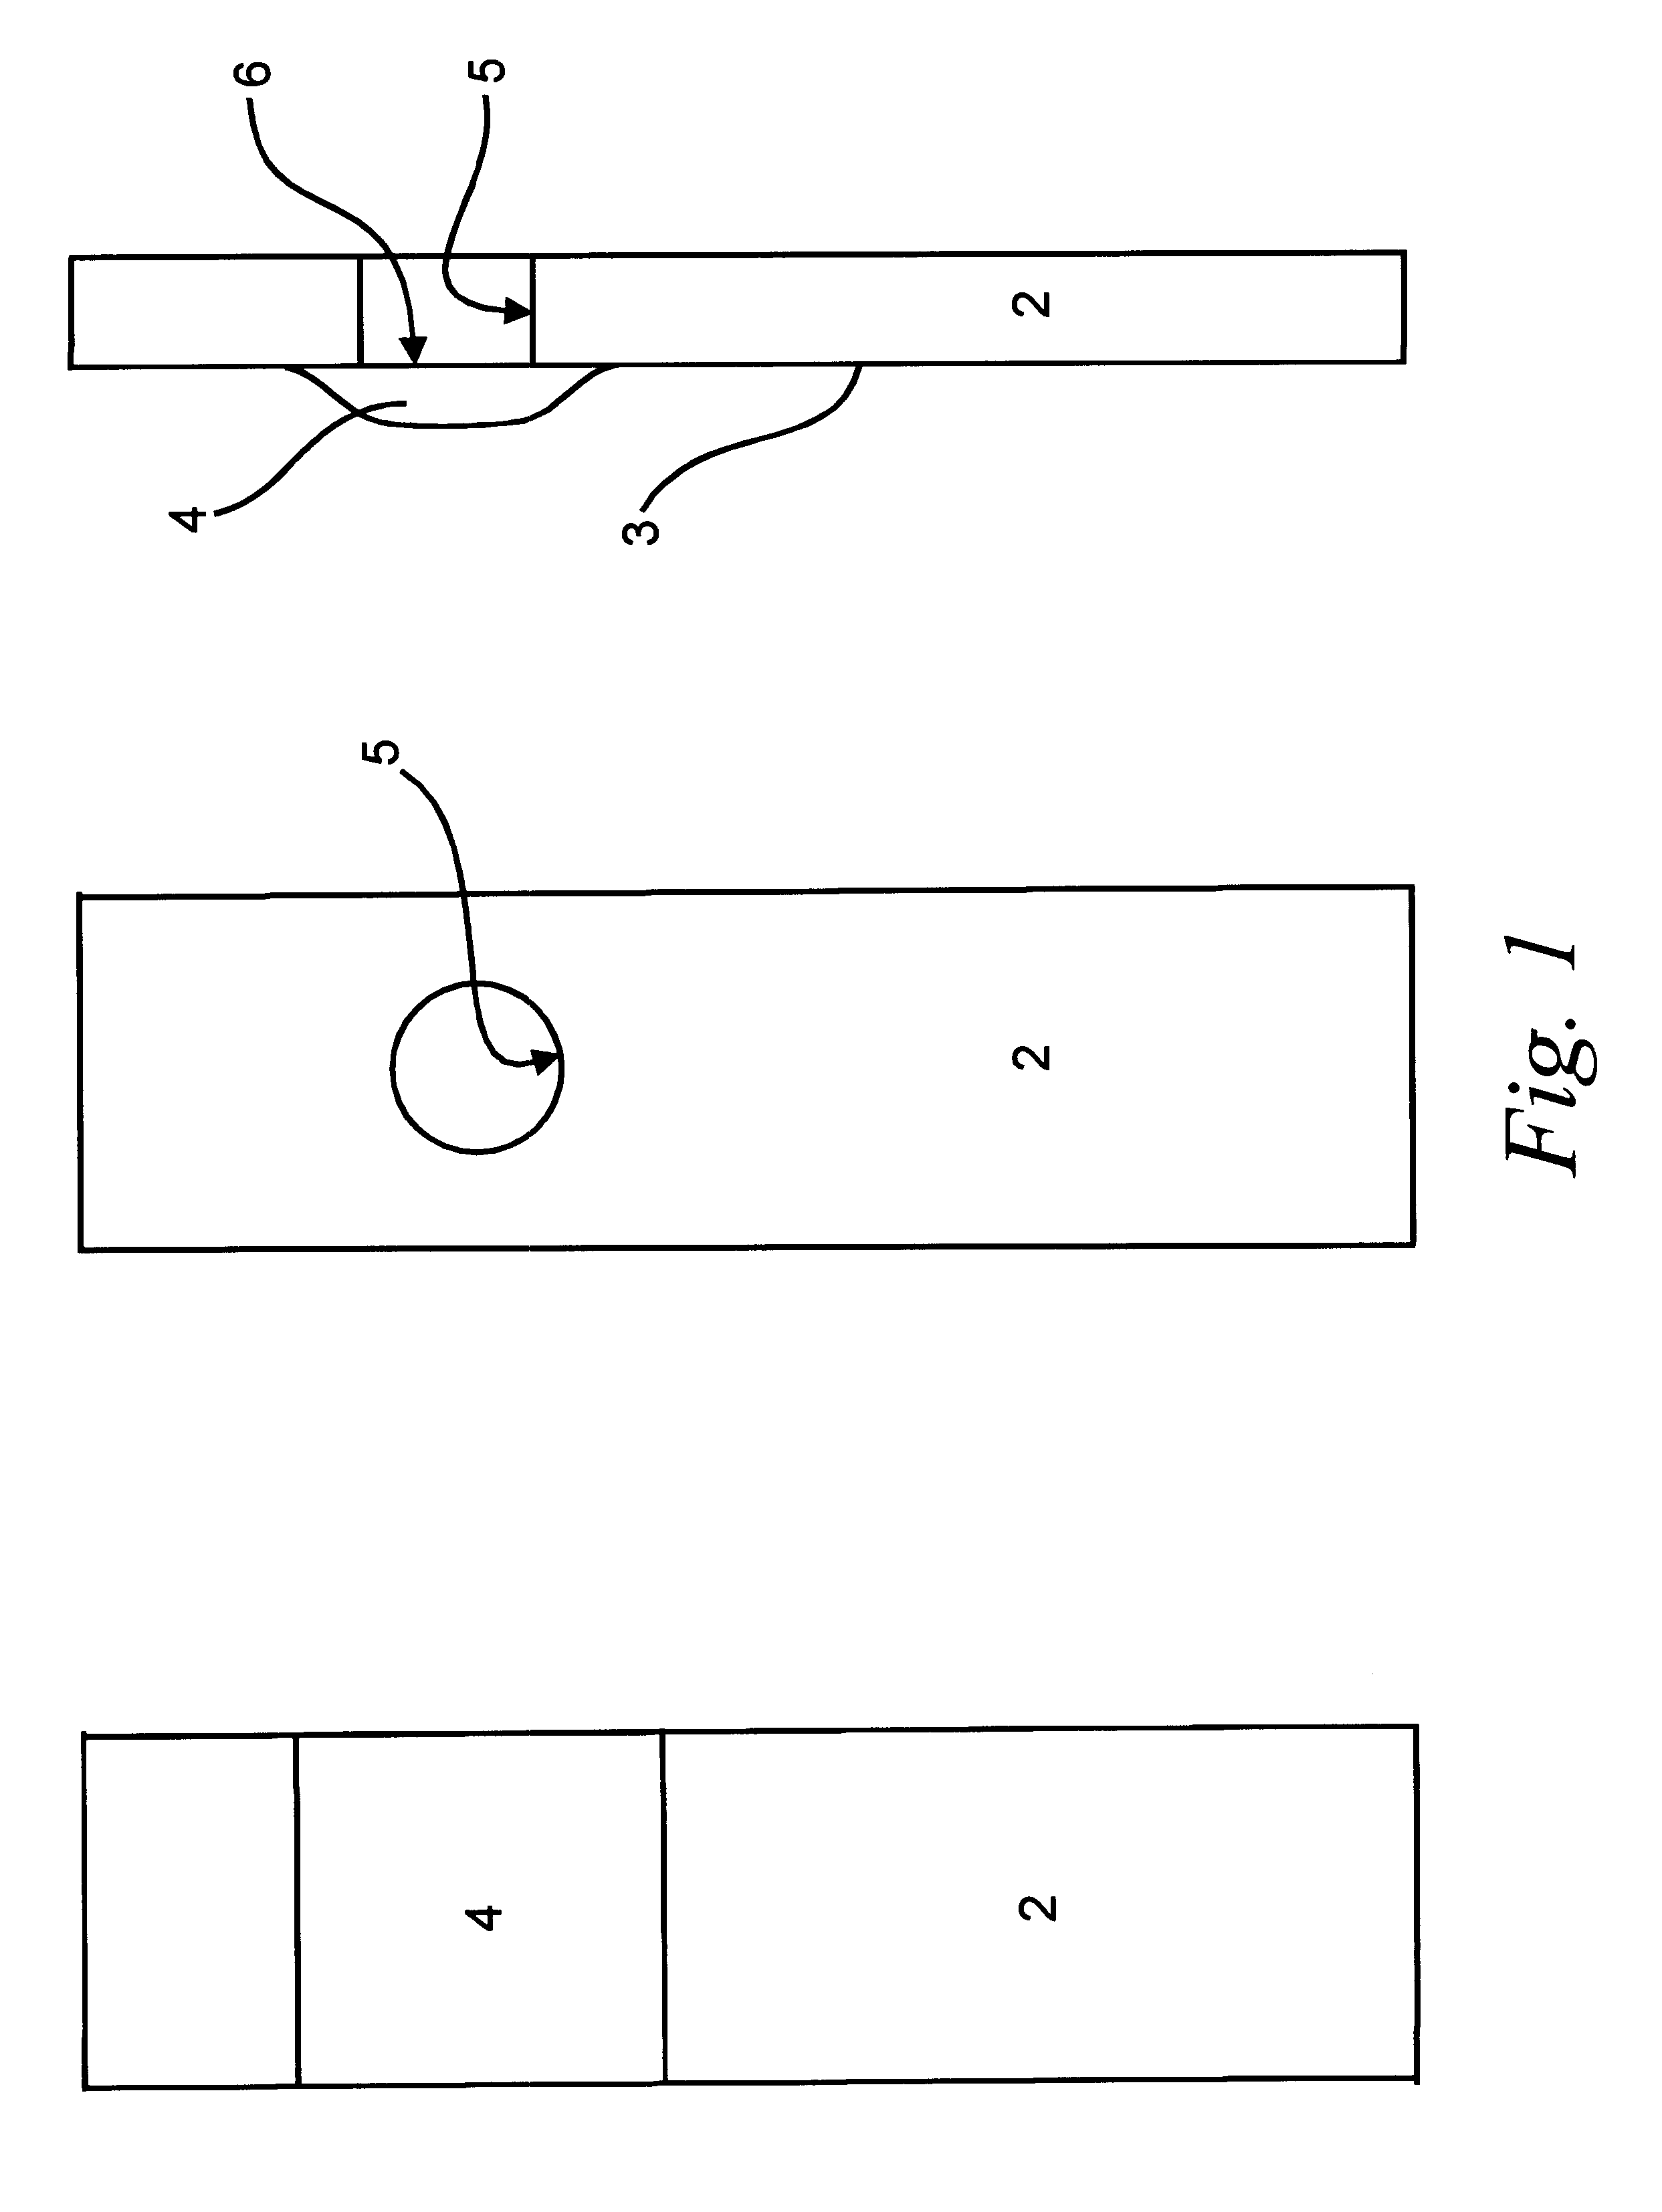 Method for determining the glucose content of a blood sample